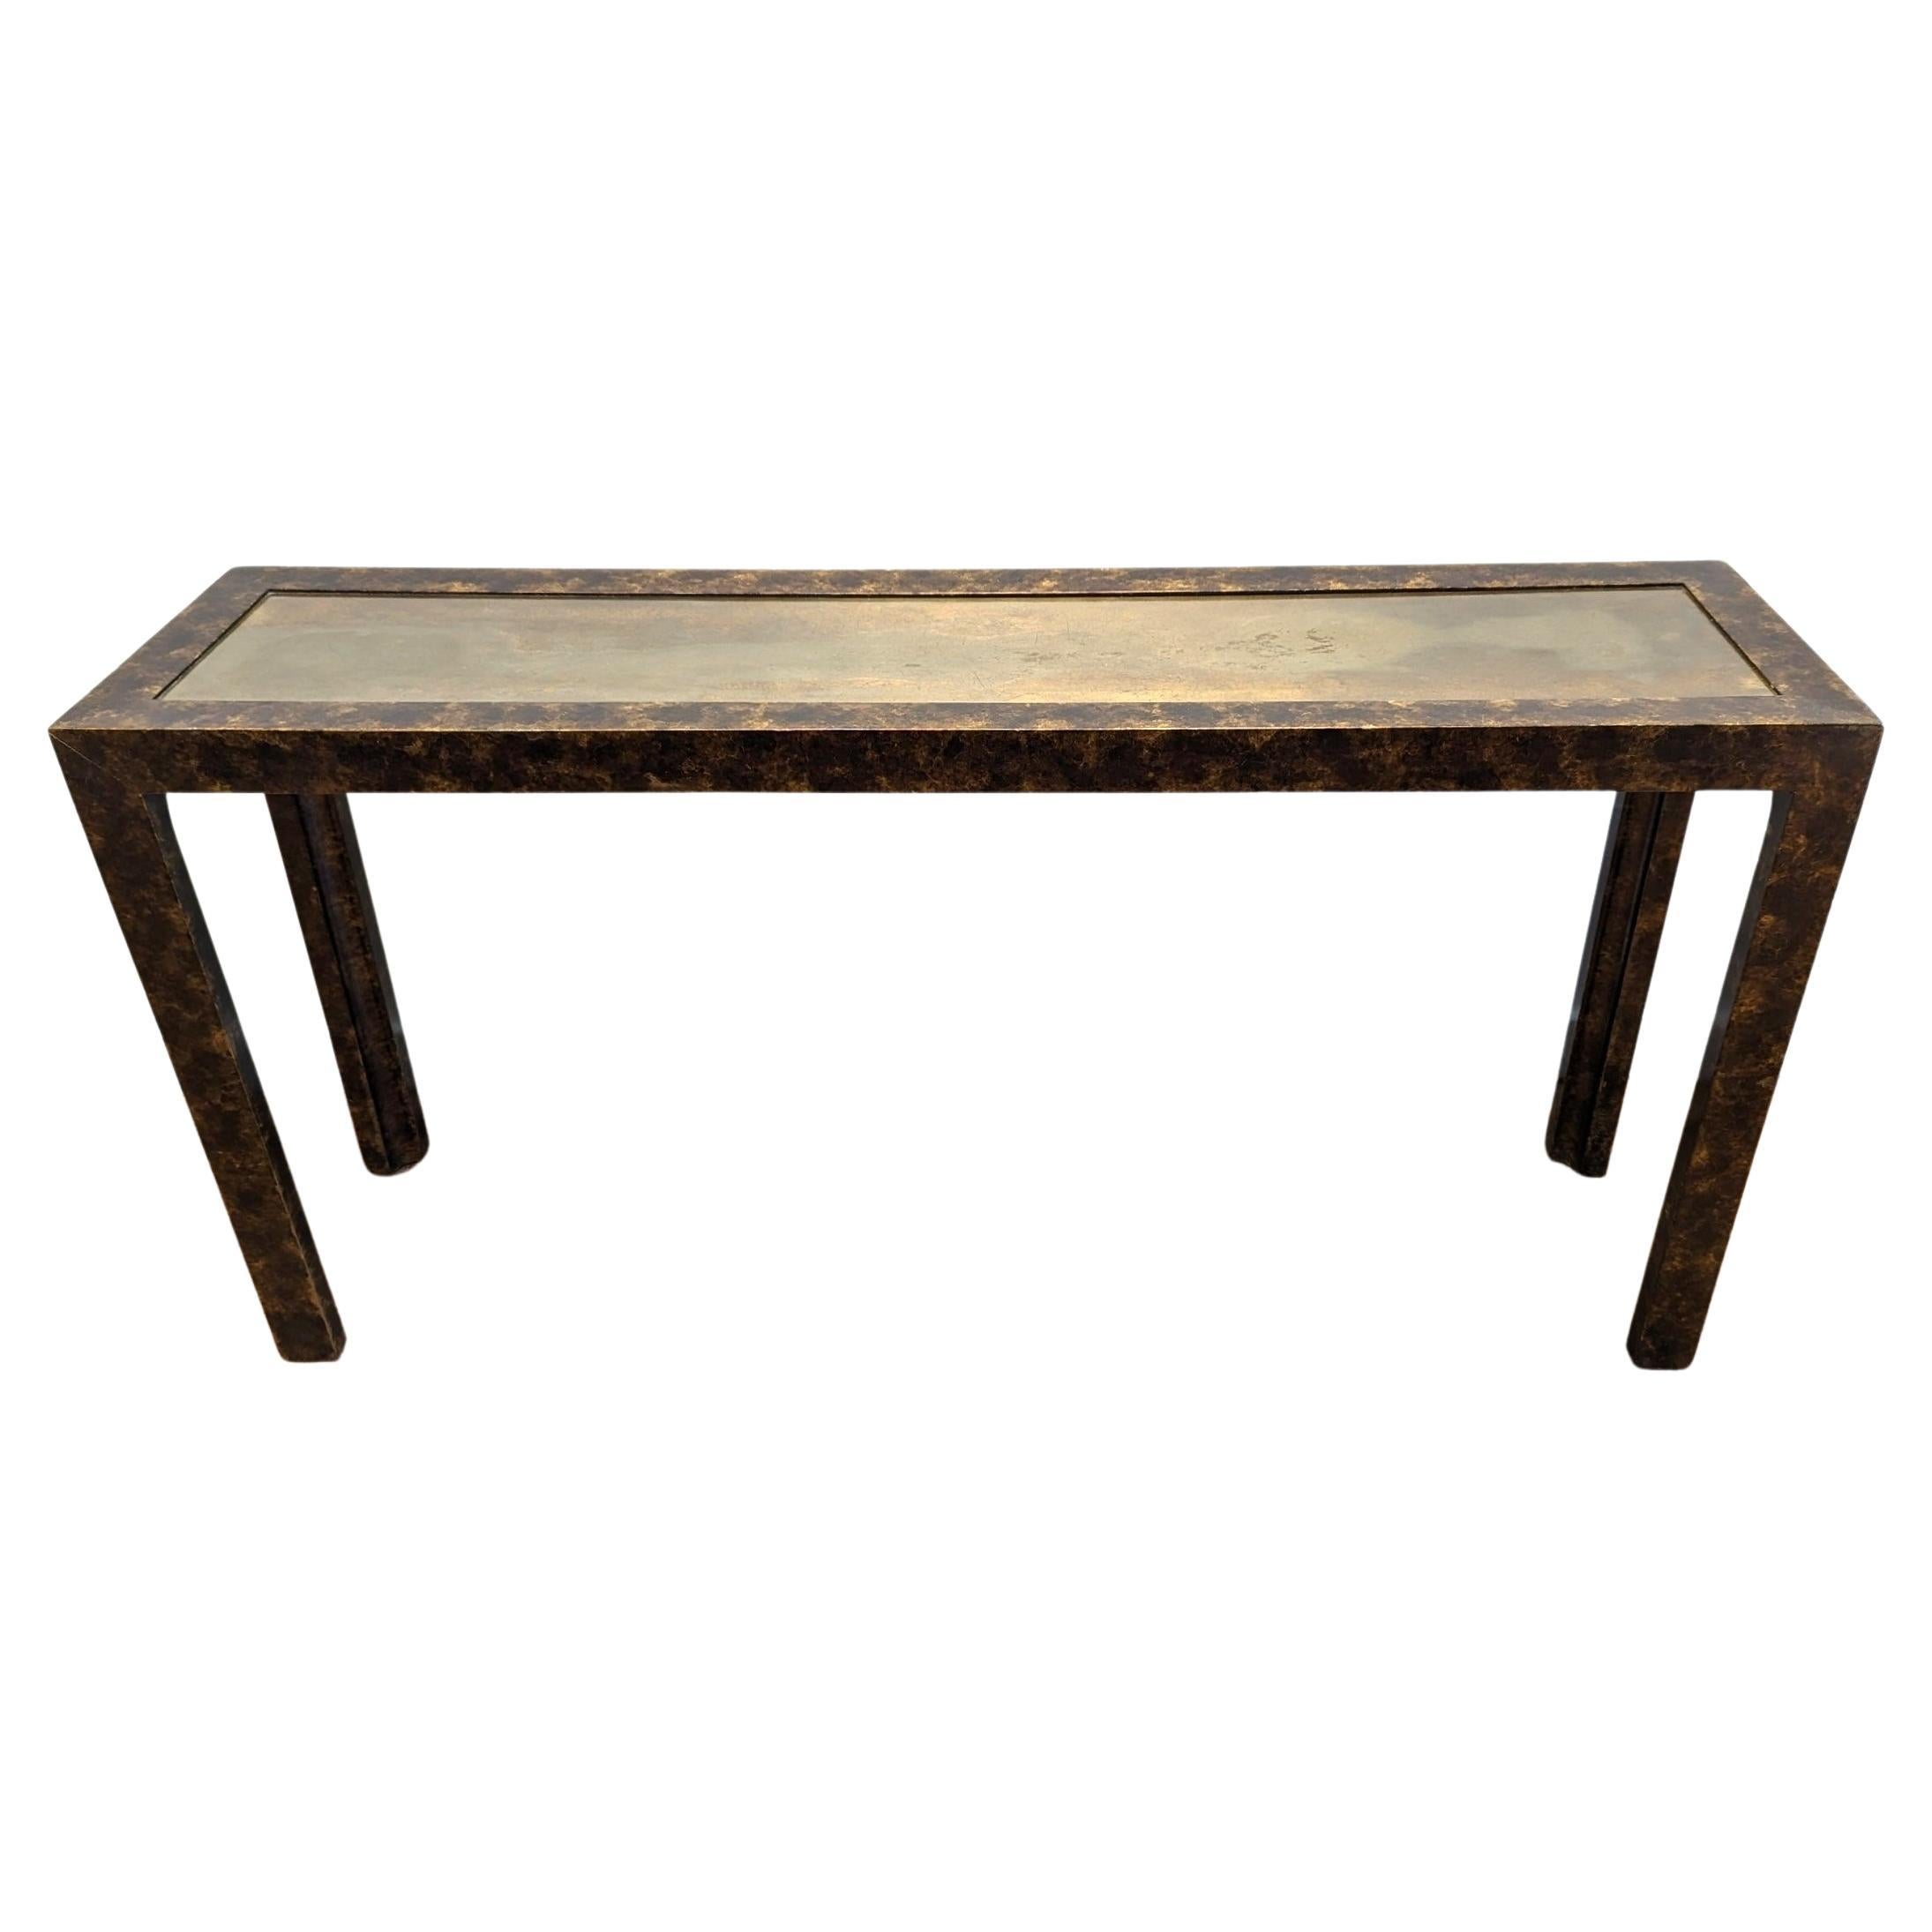 John Widdicomb Patinaed Brass Top Console Table For Sale